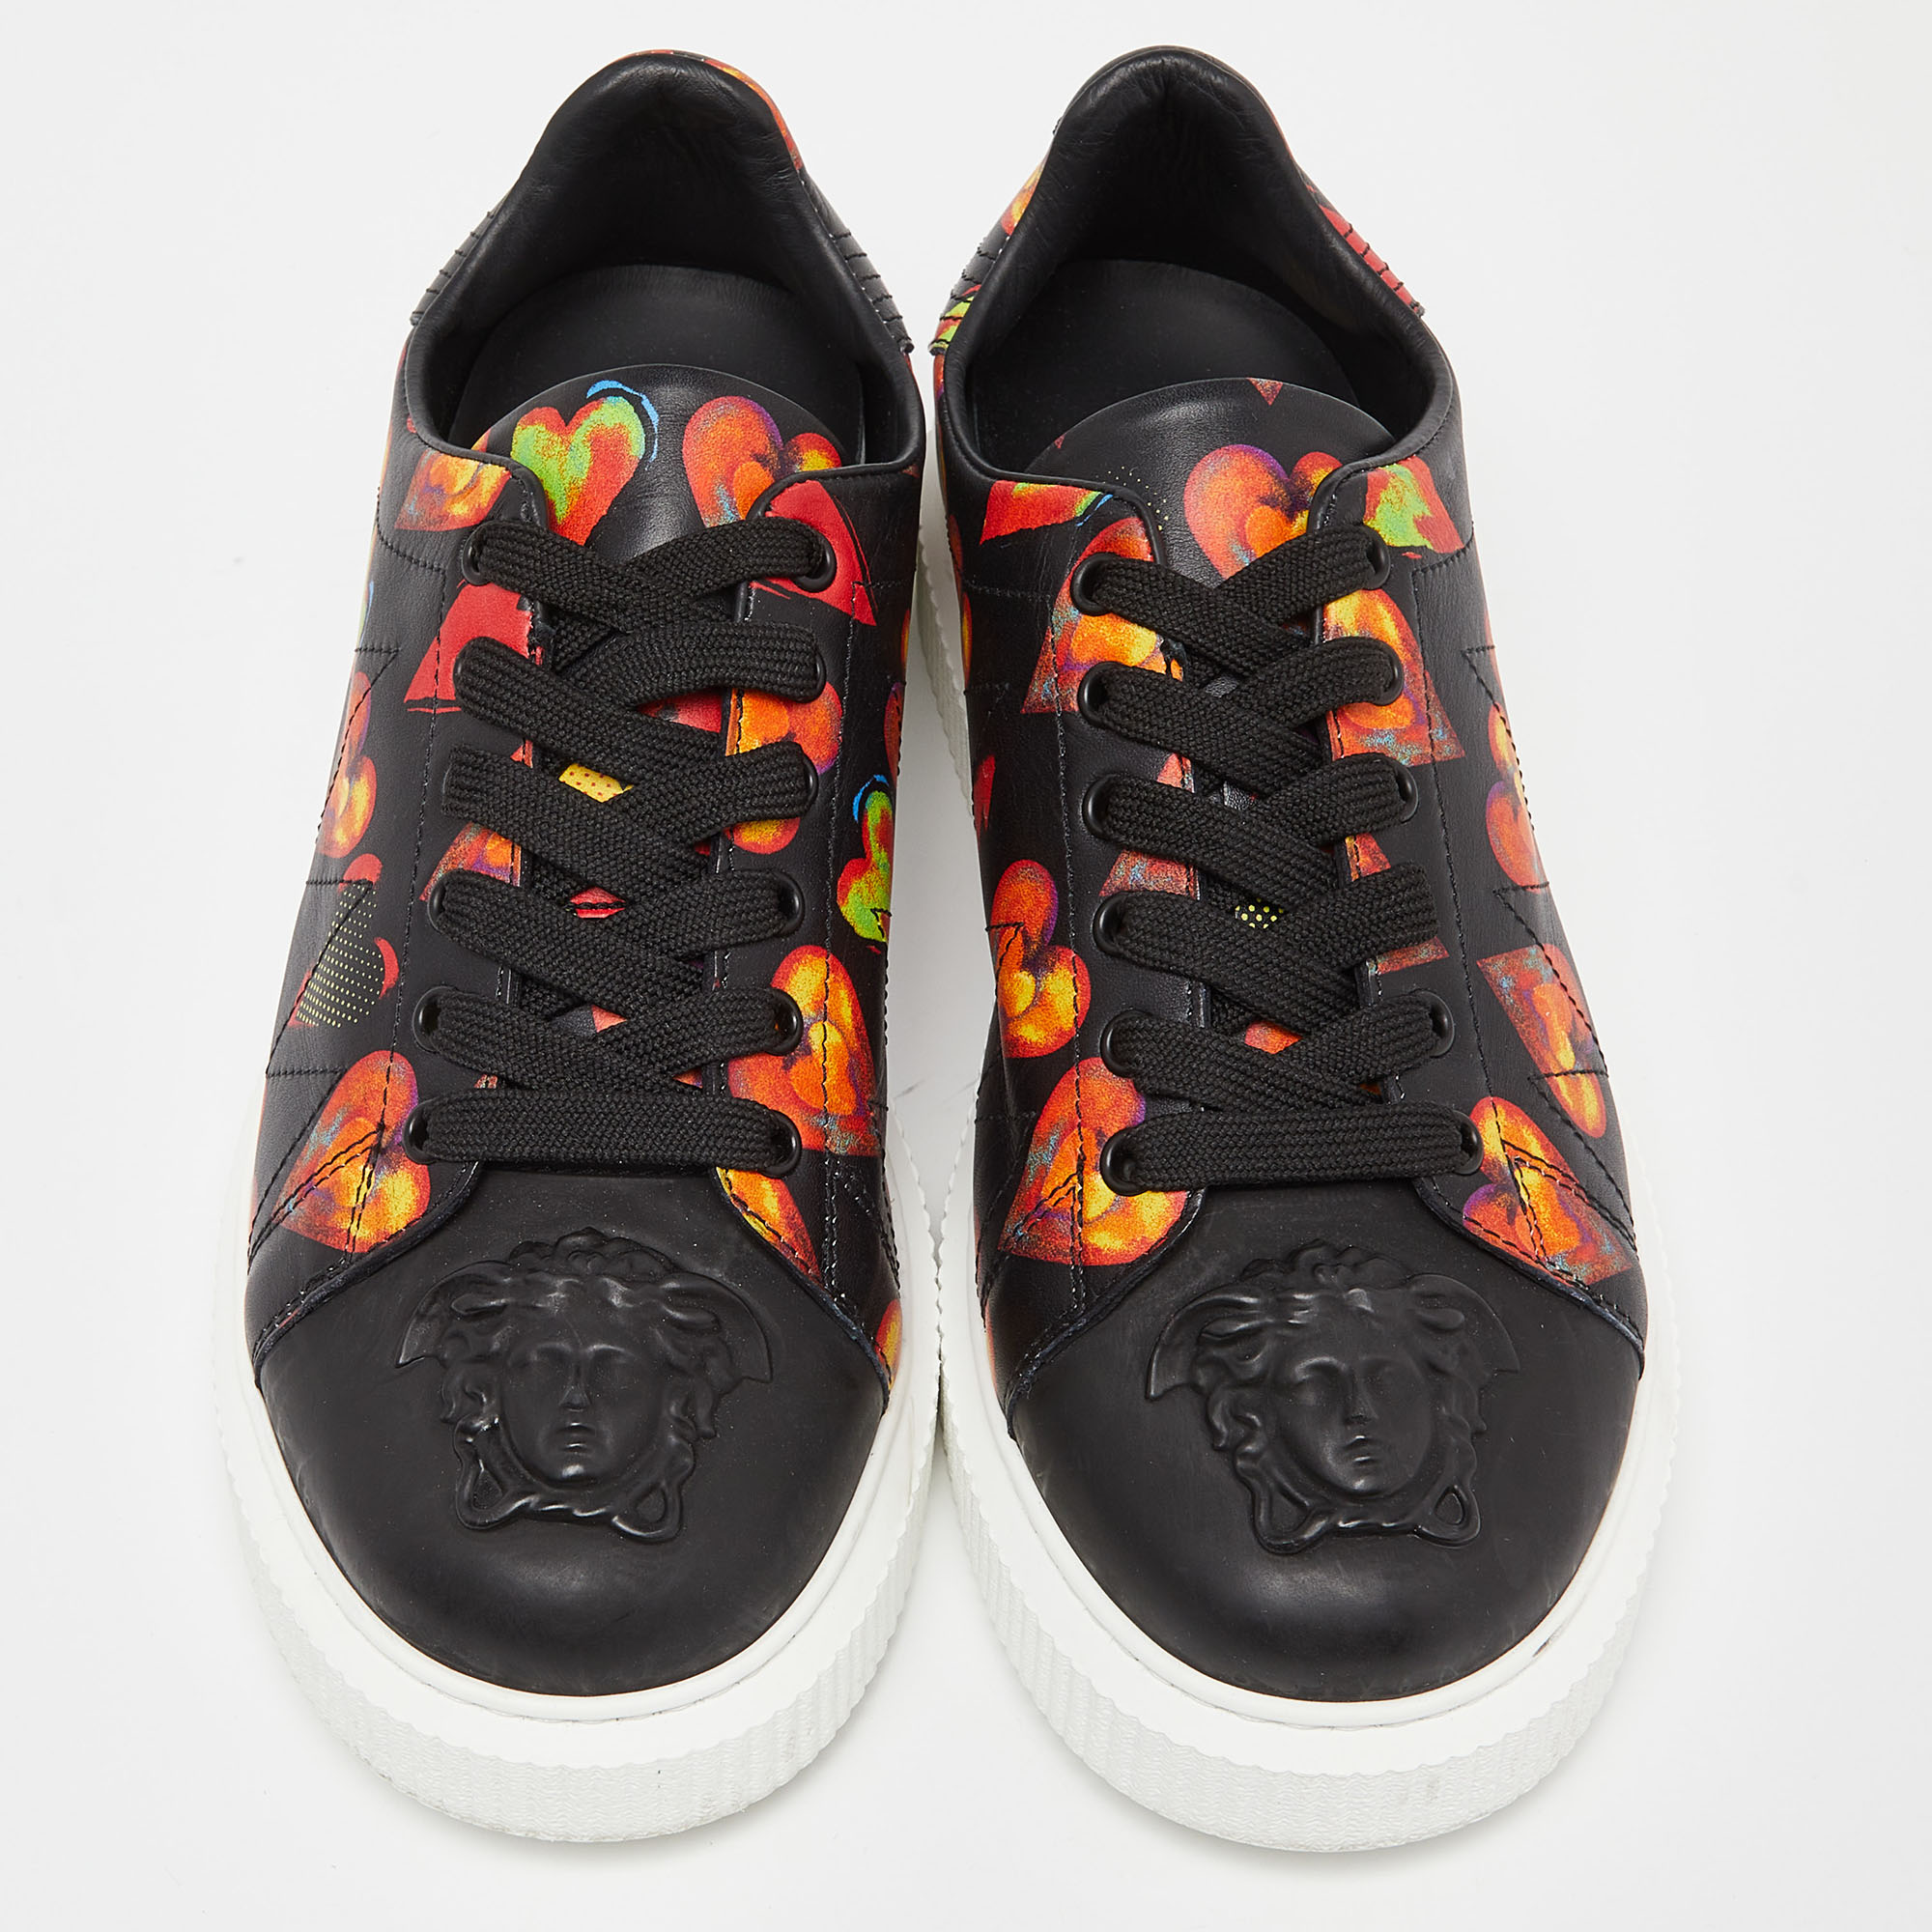 Versace Black Heart Printed Leather Medusa Sneakers Size 39